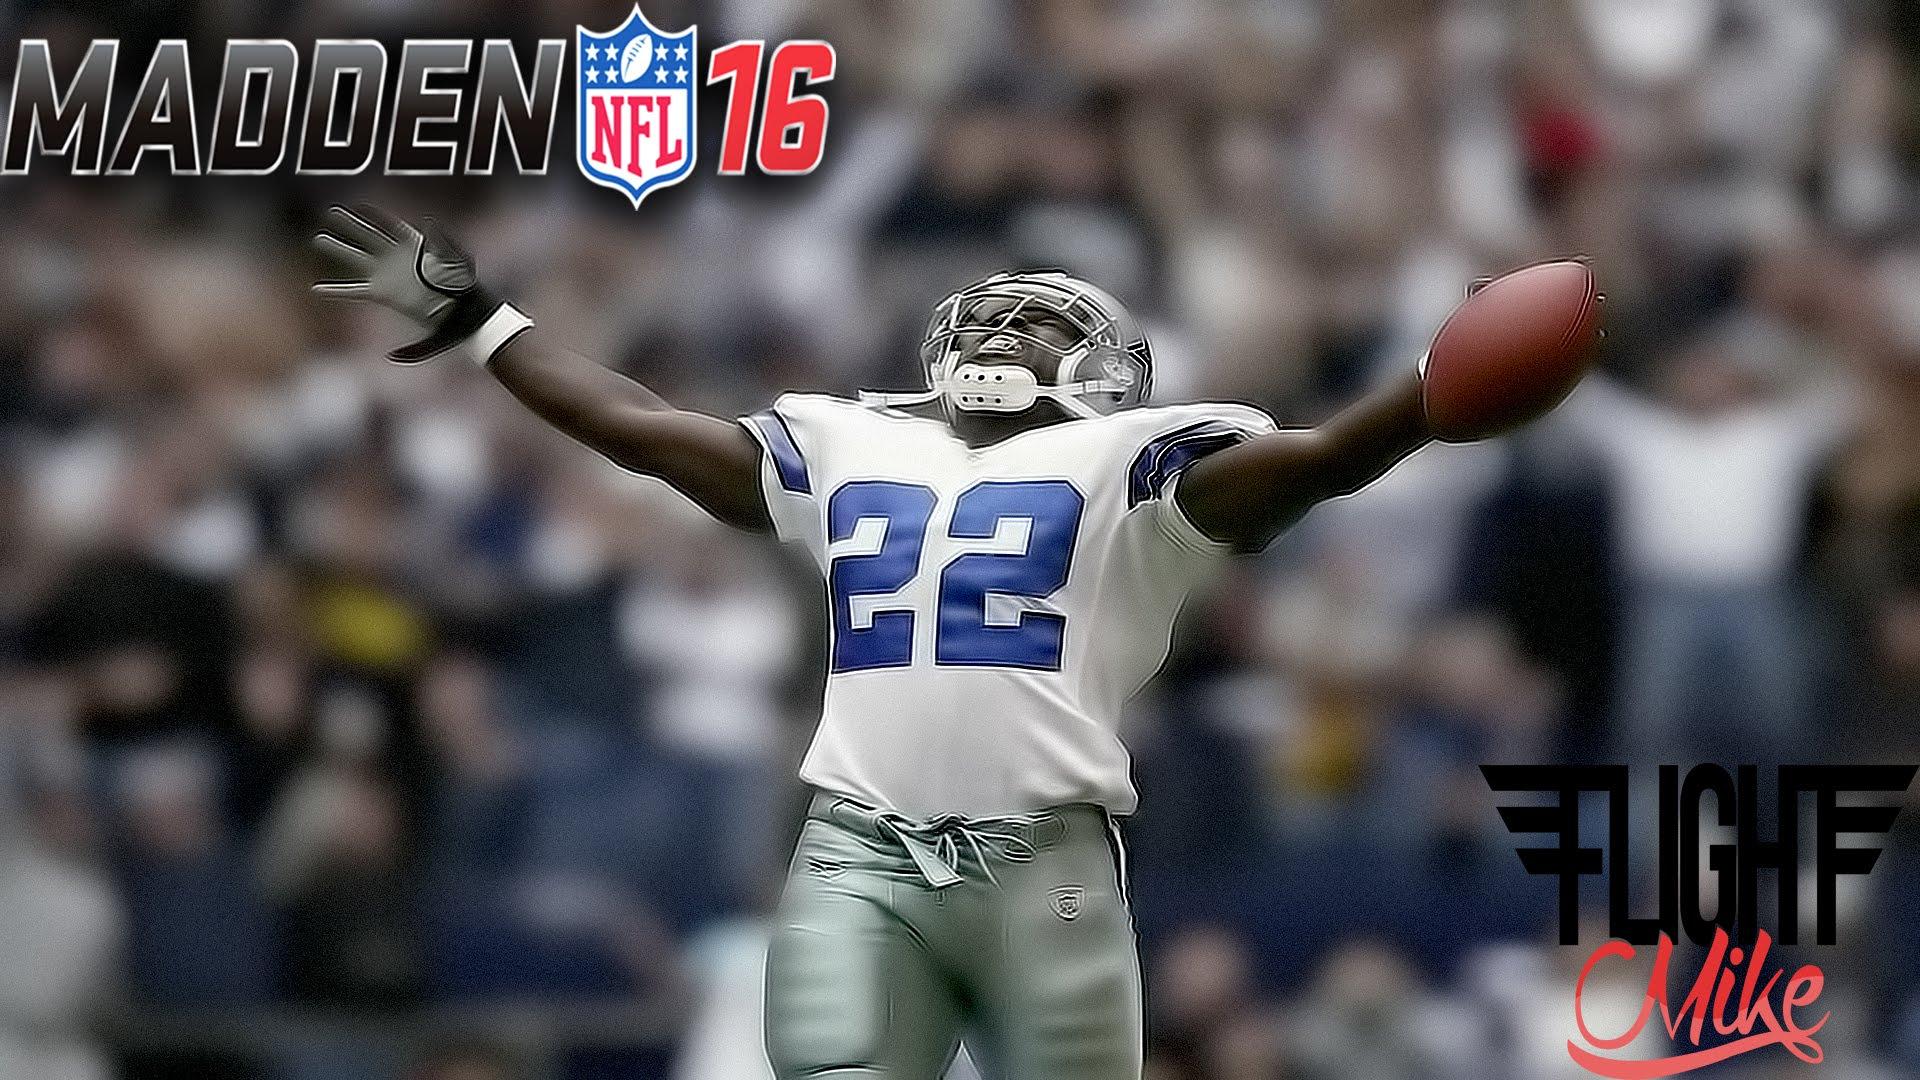 THE GREATEST NFL HB OF ALL TIME!!!! EMMITT SMITH DOMINATES